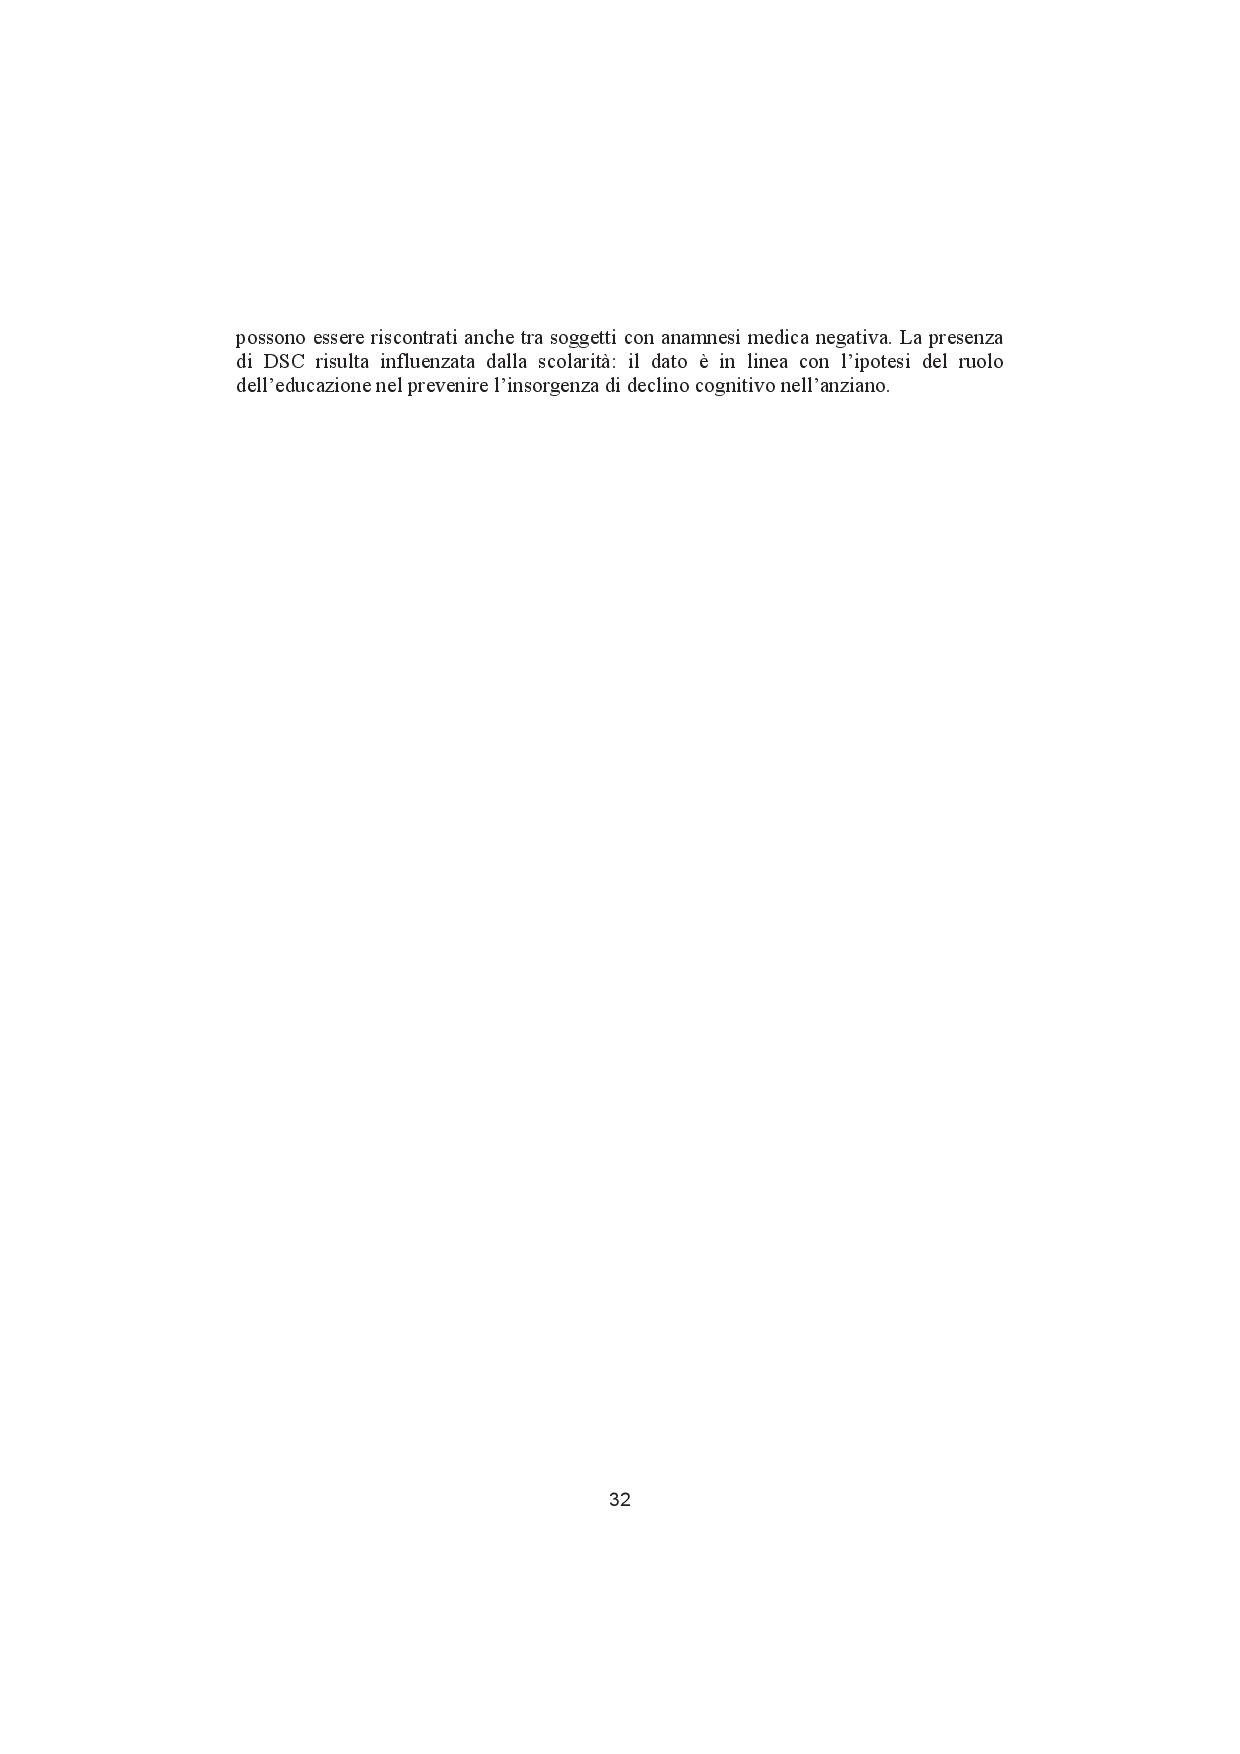 ISS convegno 13 C5-page-002